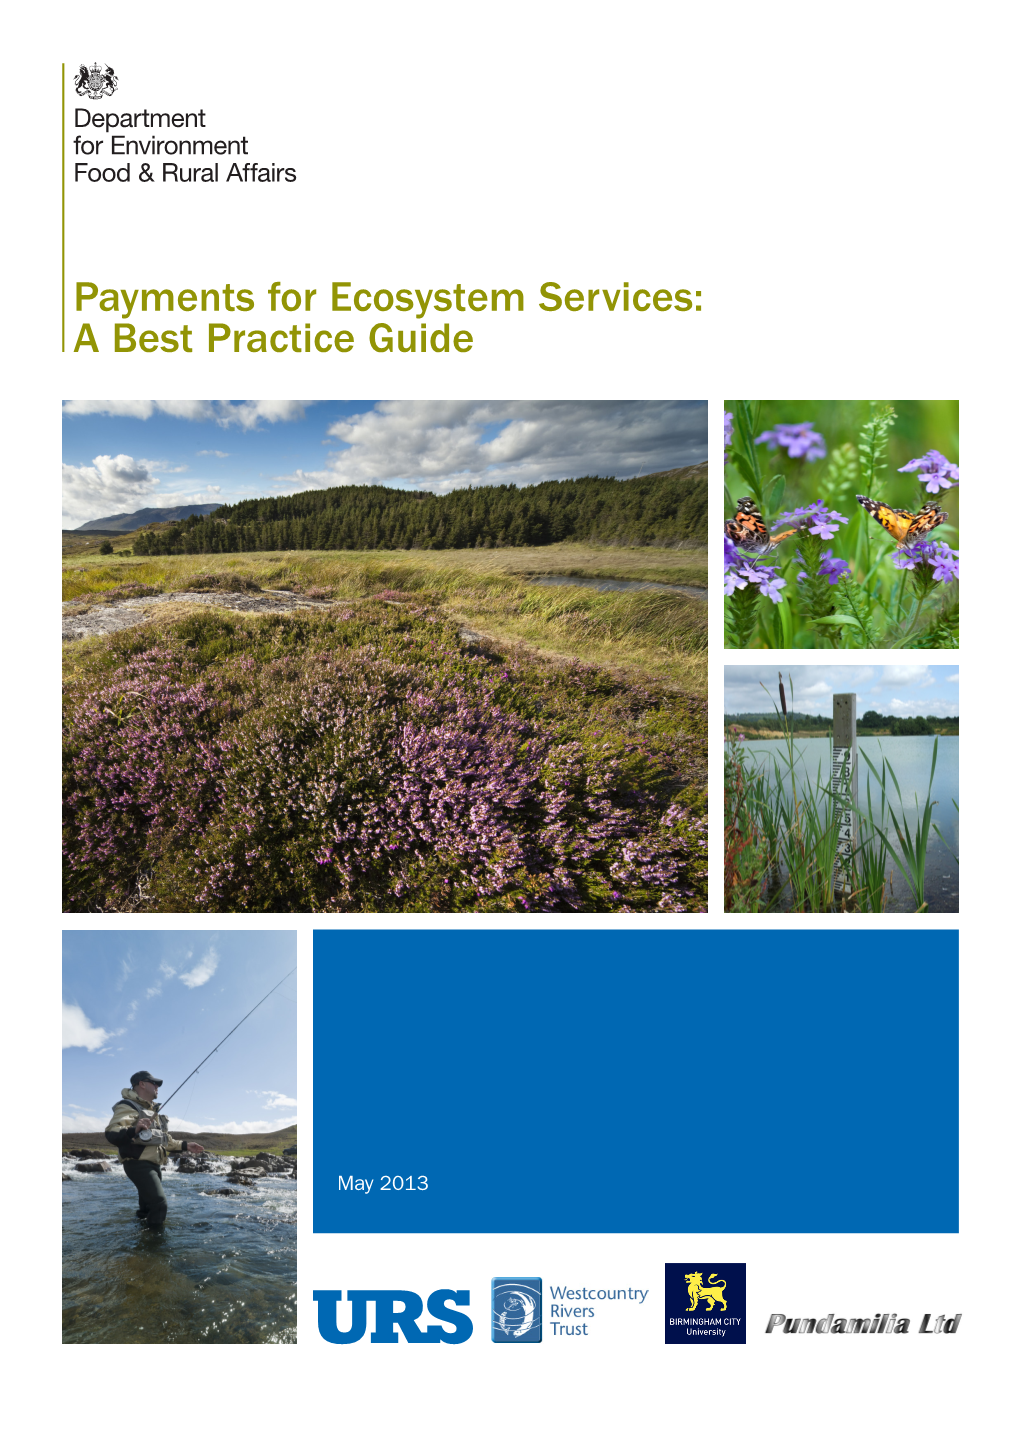 Payments for Ecosystem Services (PES): Best Practice Guide